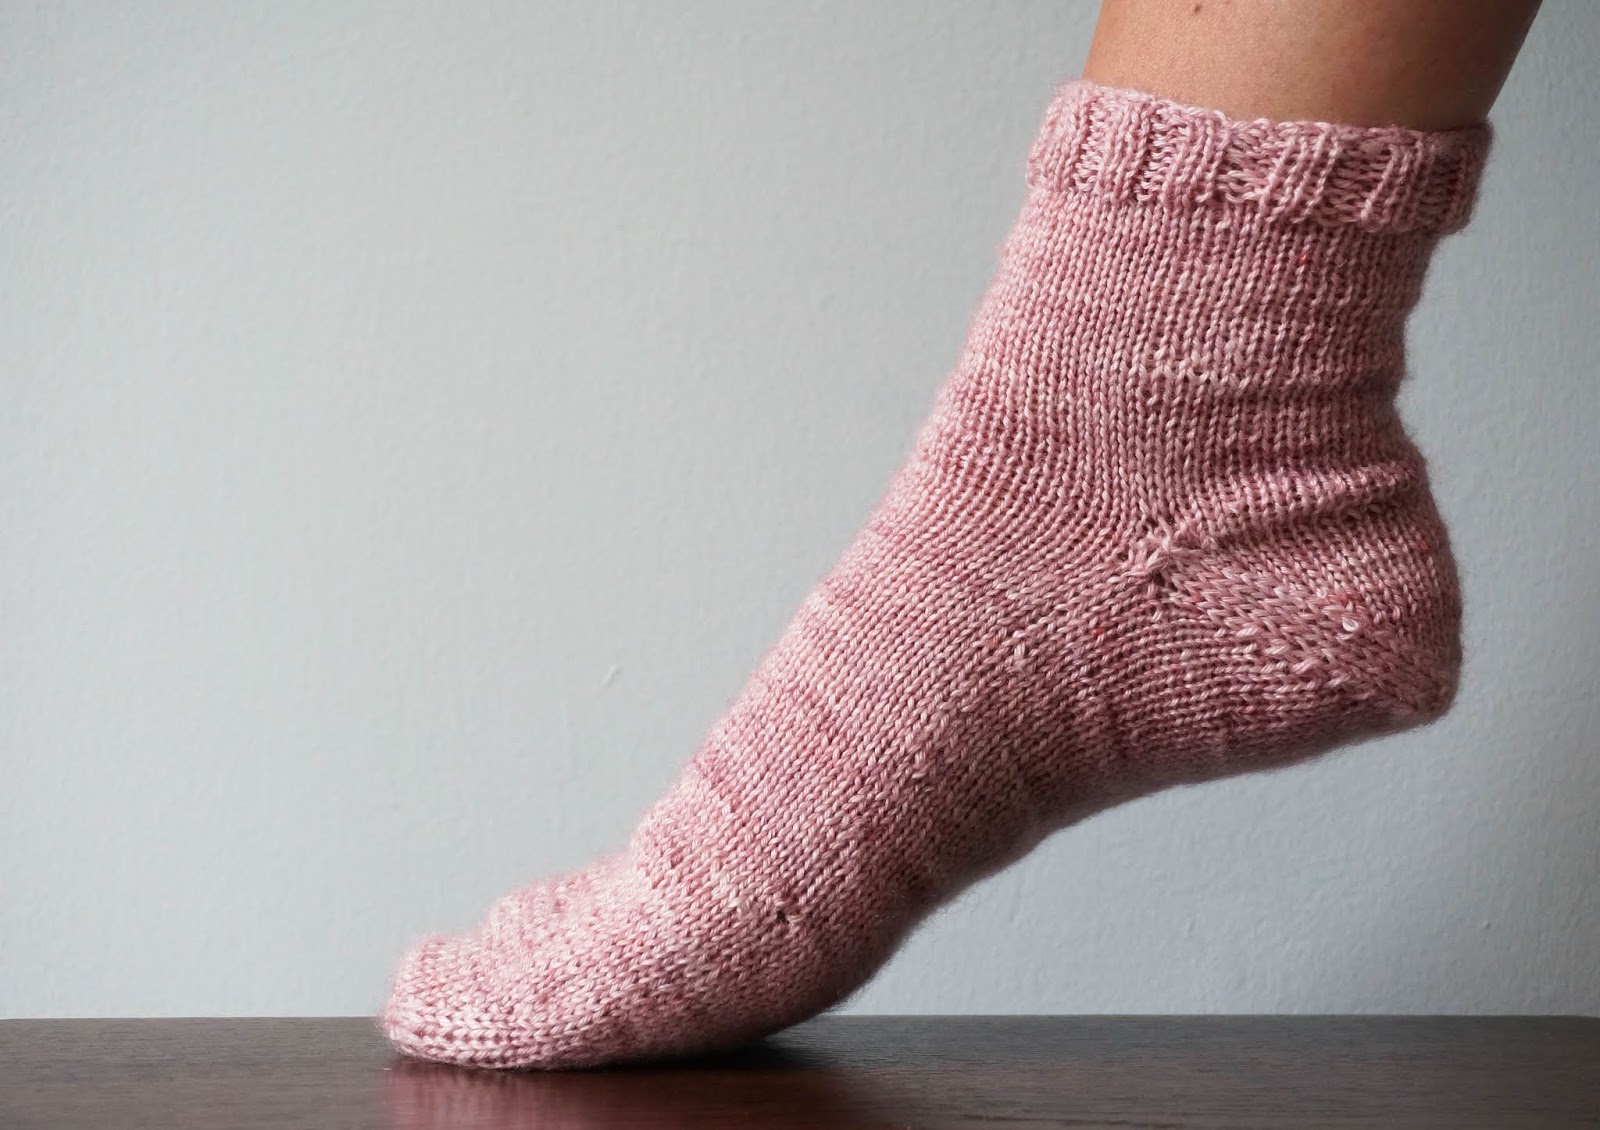 Craftsy class review: My First Toe-Up Socks with Susan B. Anderson